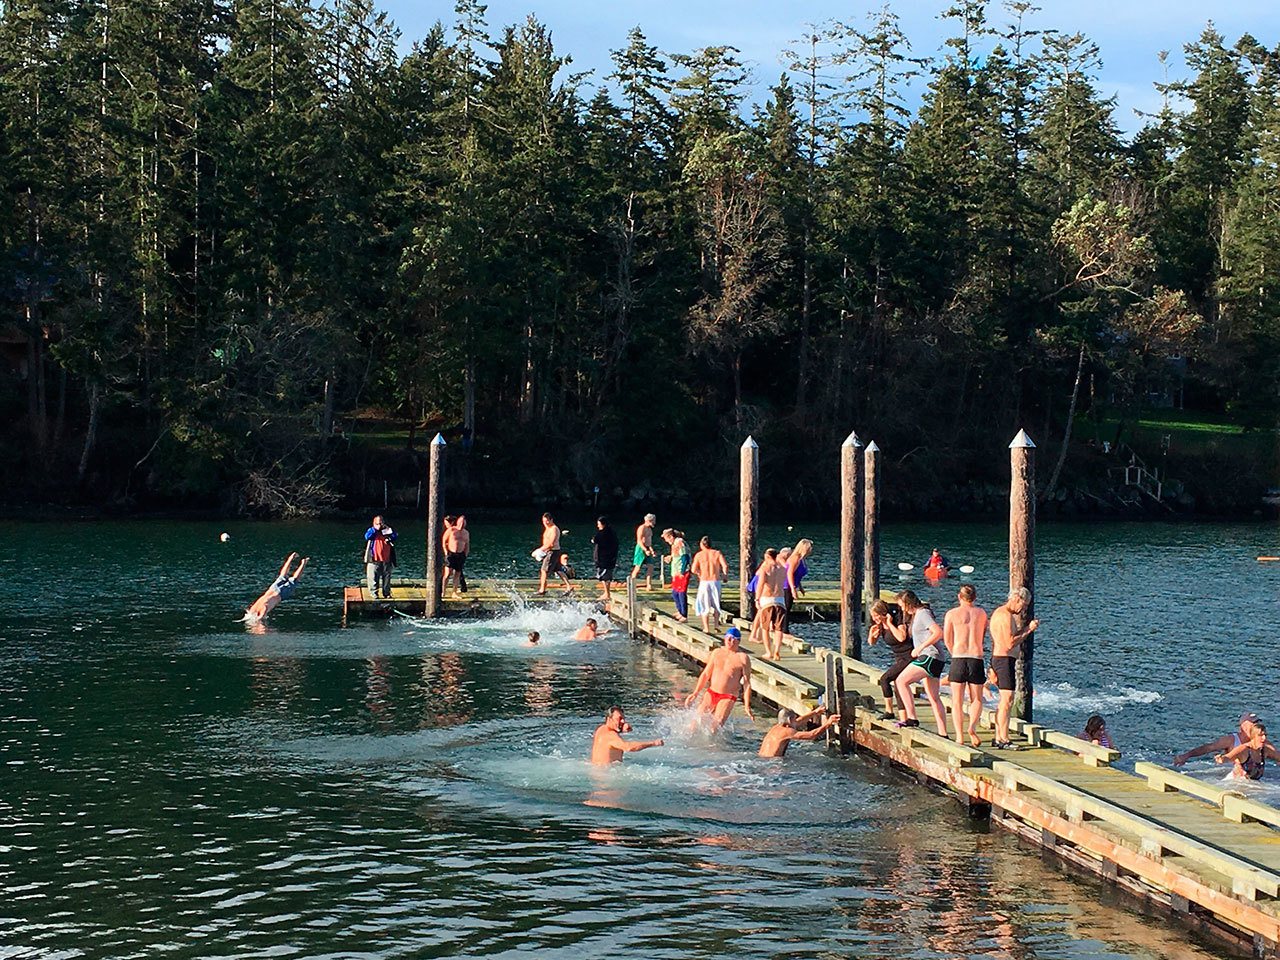 Over 50 people welcomed the new year with a swim in the bay across from the general store in Nordland on Sunday. (Alice Baldridge)